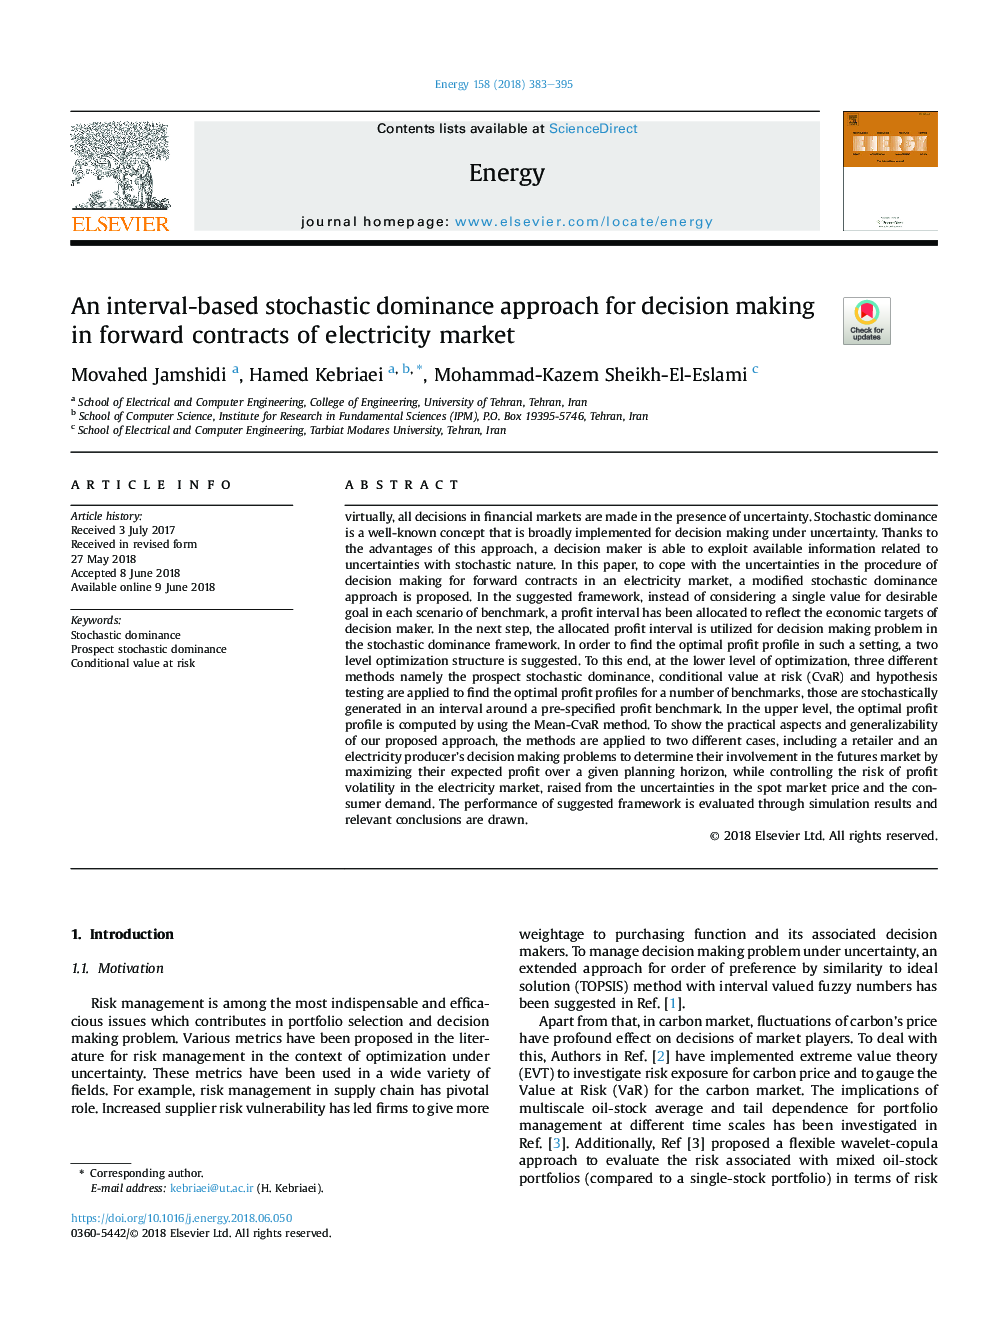 An interval-based stochastic dominance approach for decision making in forward contracts of electricity market